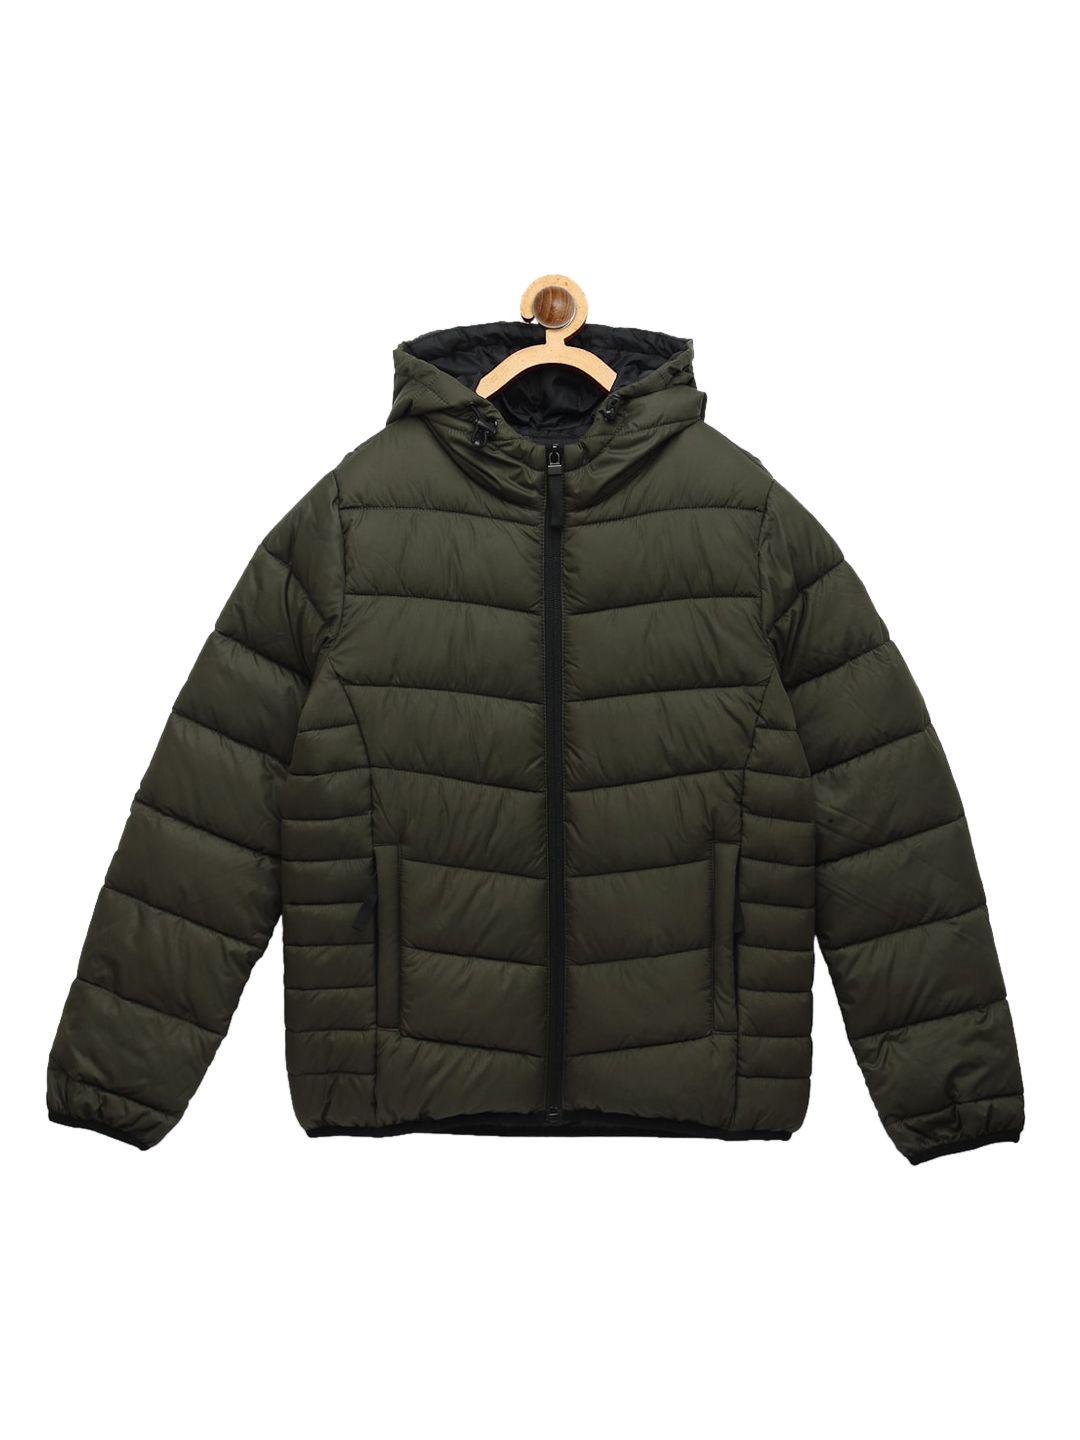 red tape boys olive green padded jacket